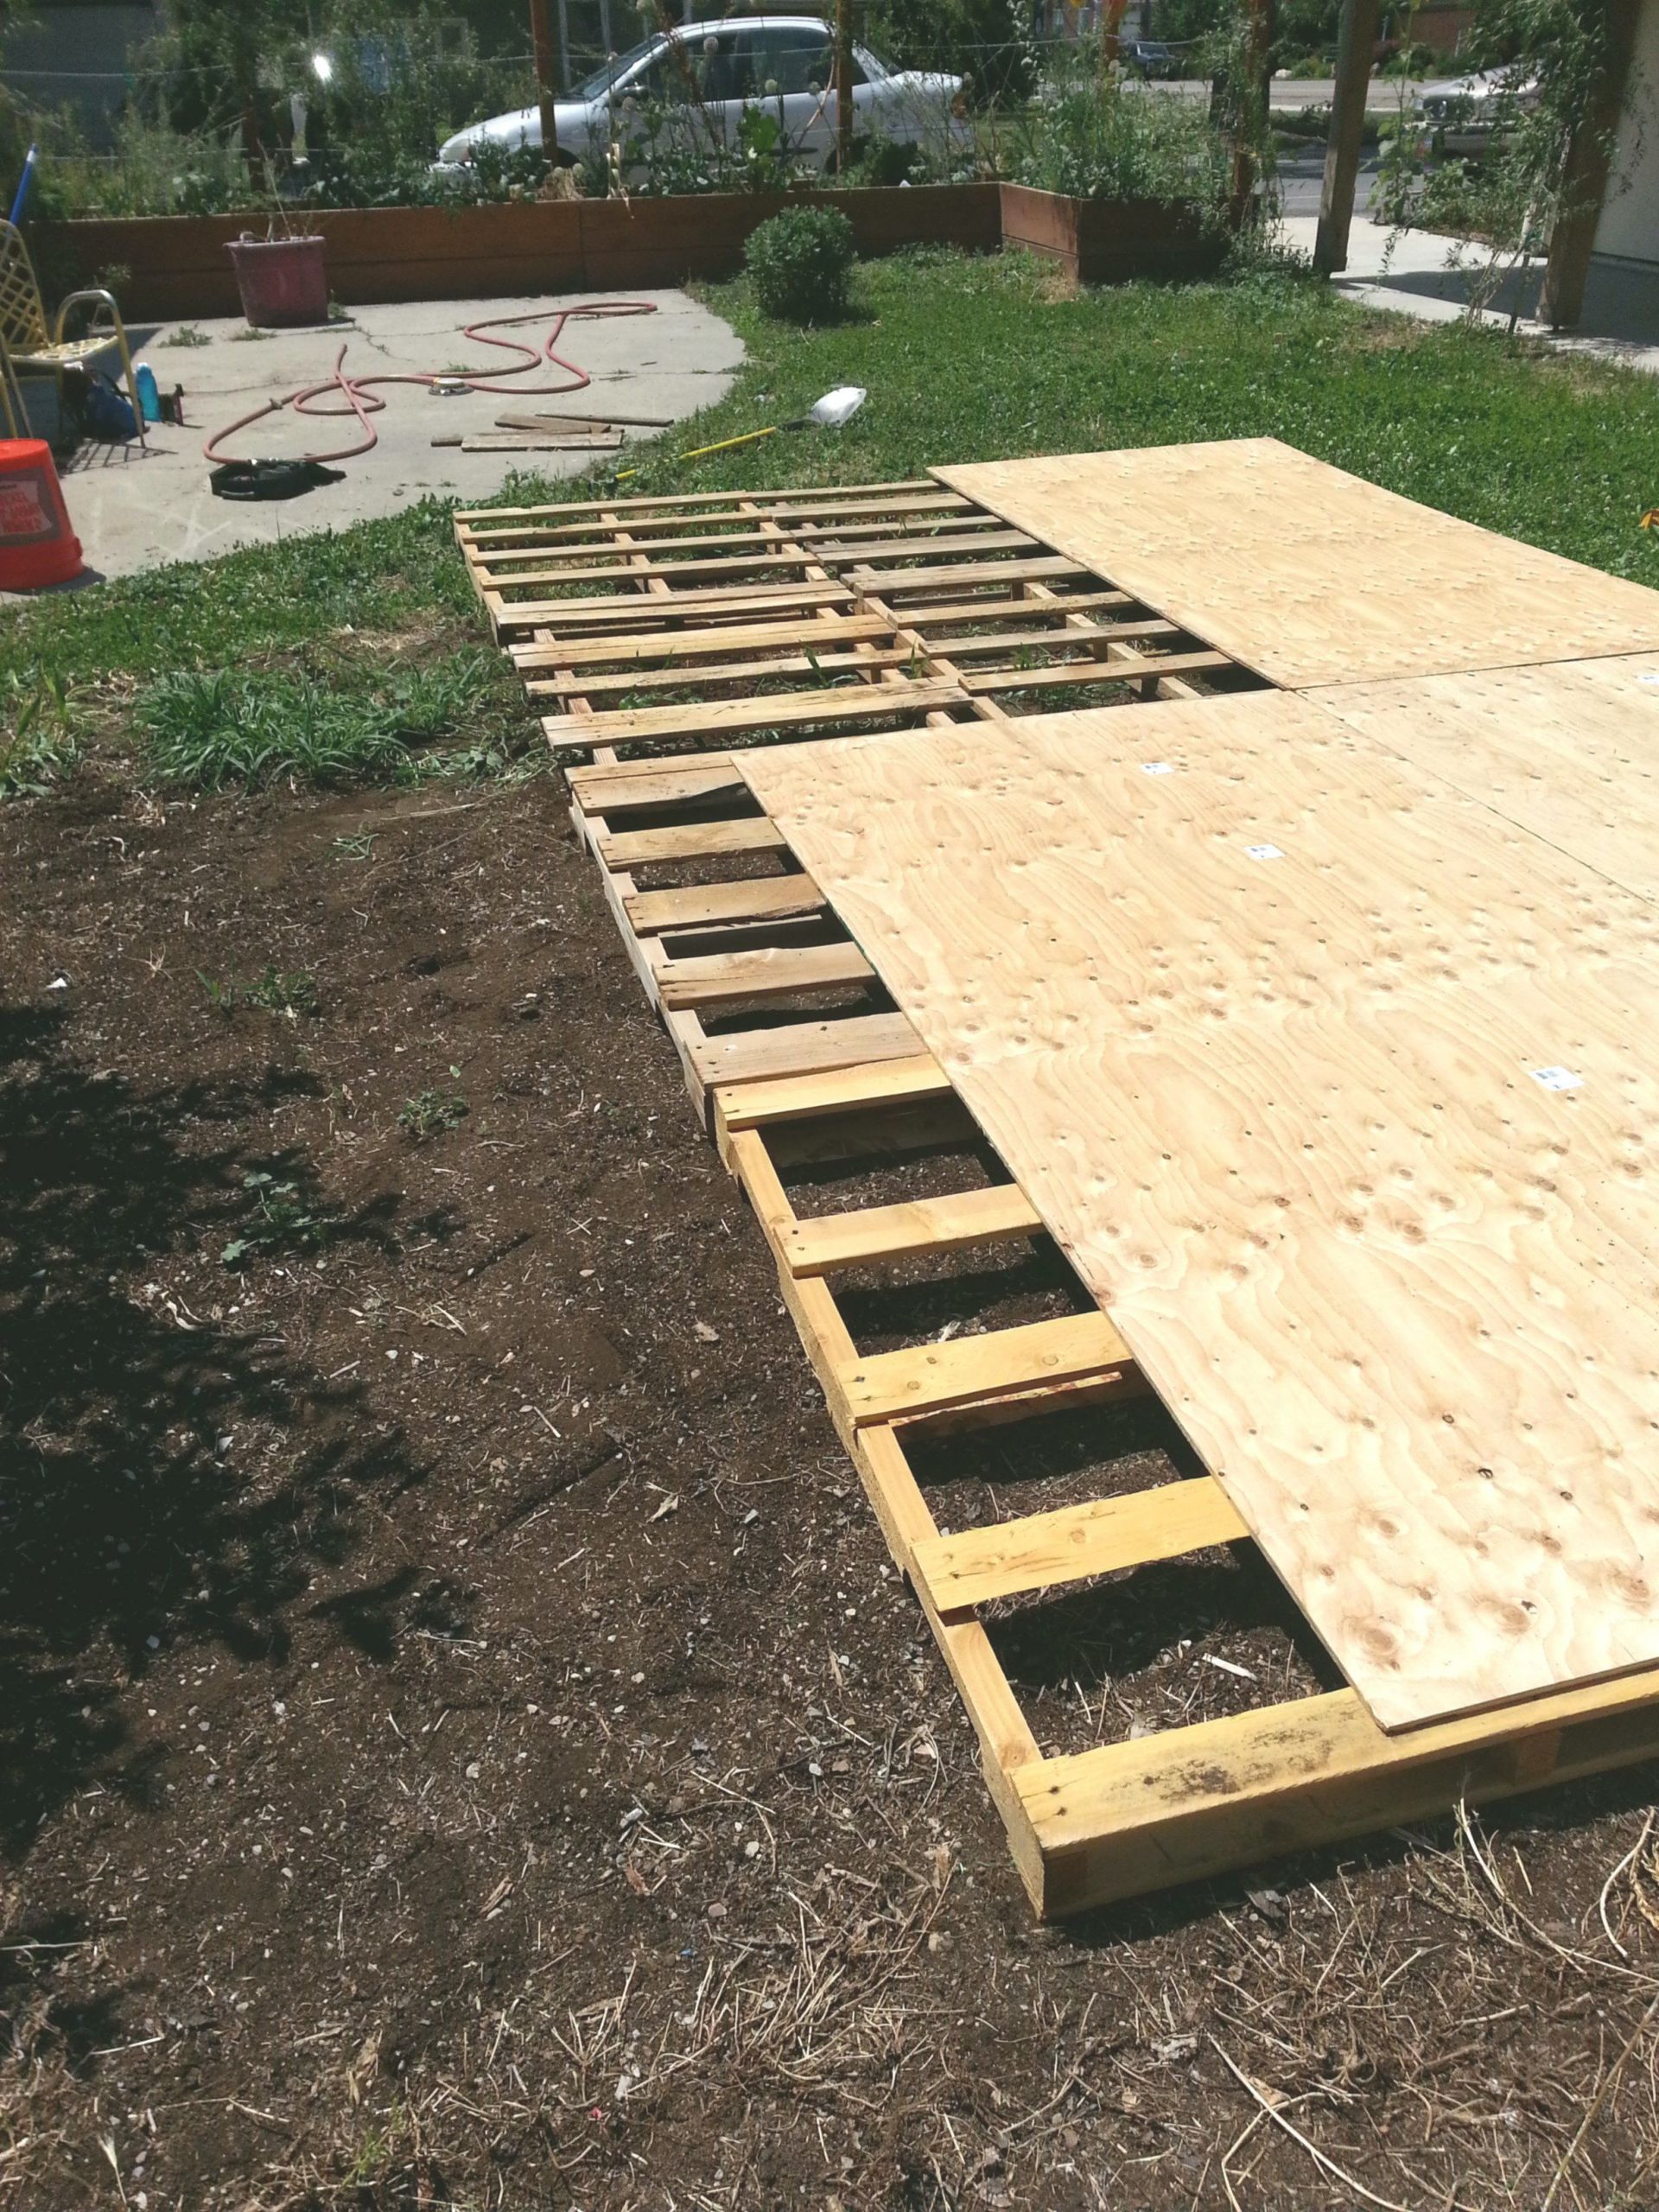 DIY Outdoor Dance Floor
 Making a Dance Ground from Recycled Pallets